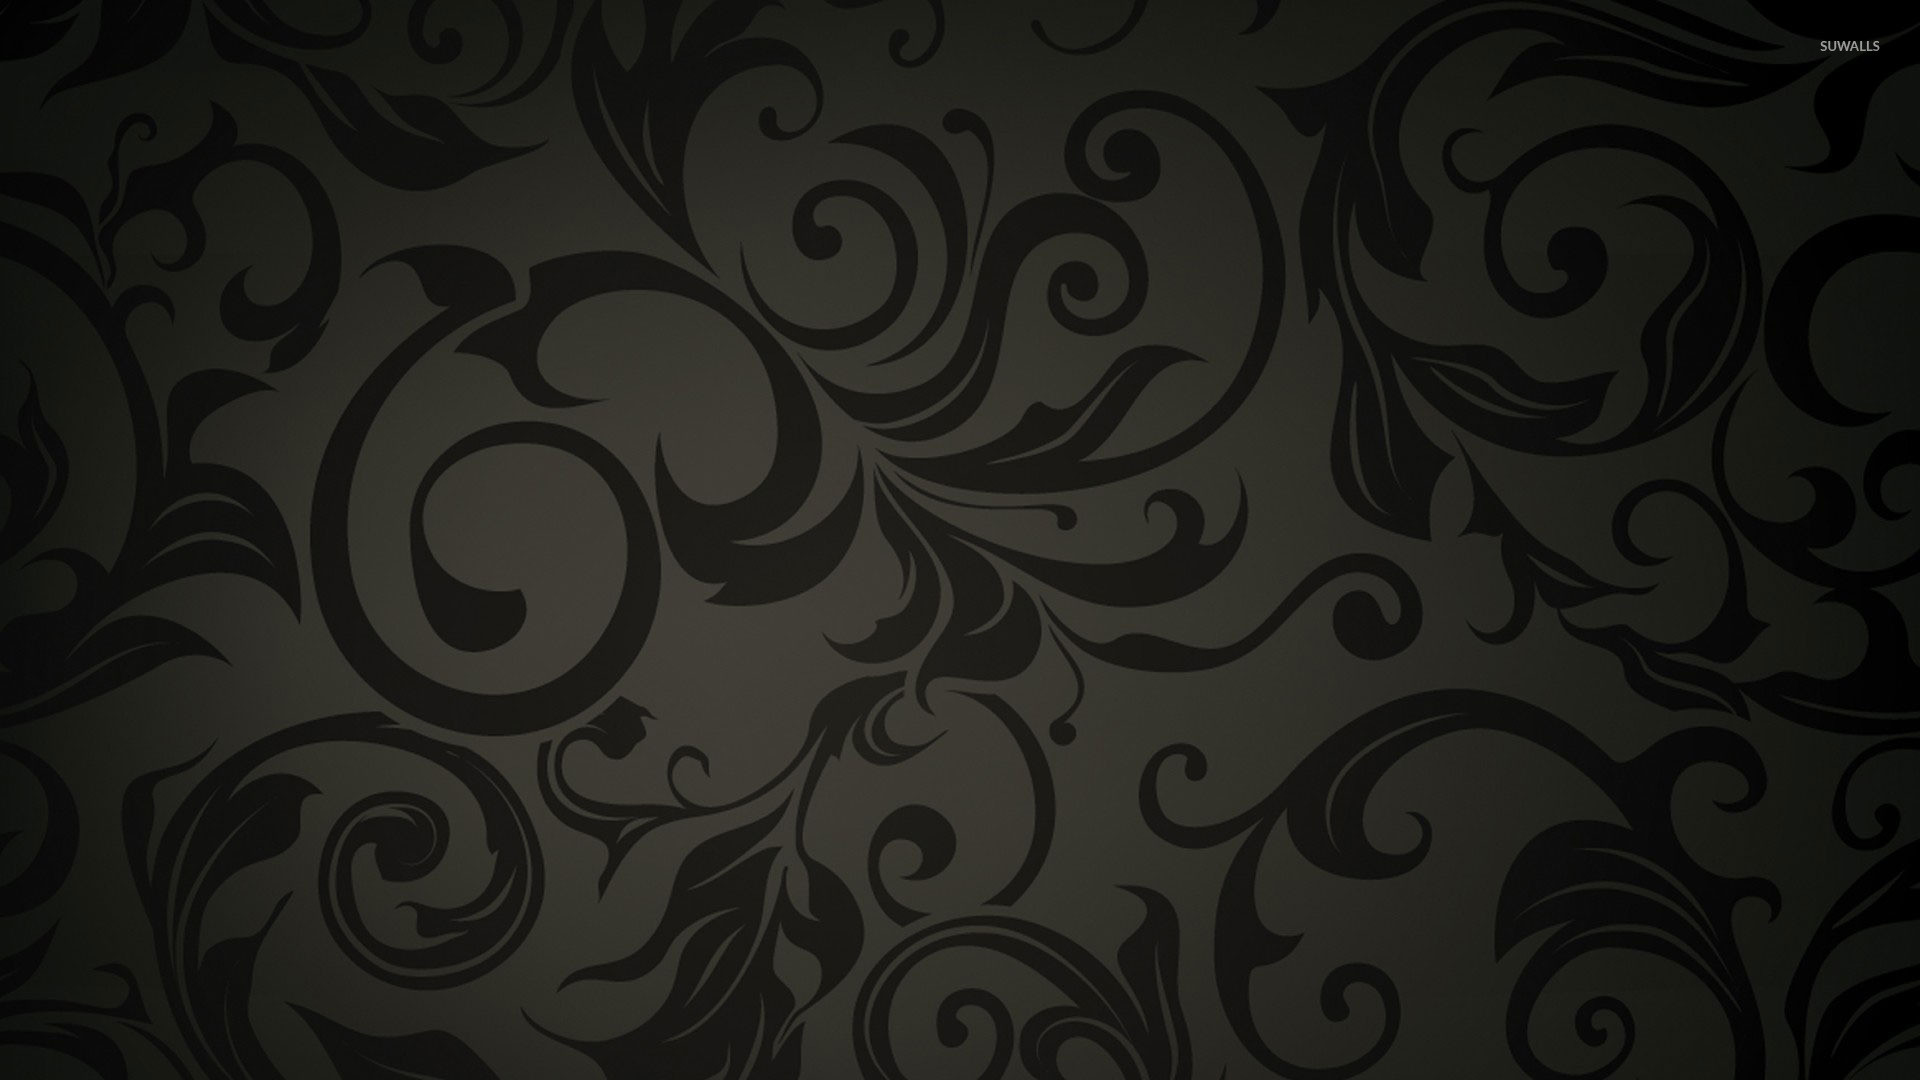 1920x1080 ... red and white swirl wallpaper abstract wallpapers 24209 ...